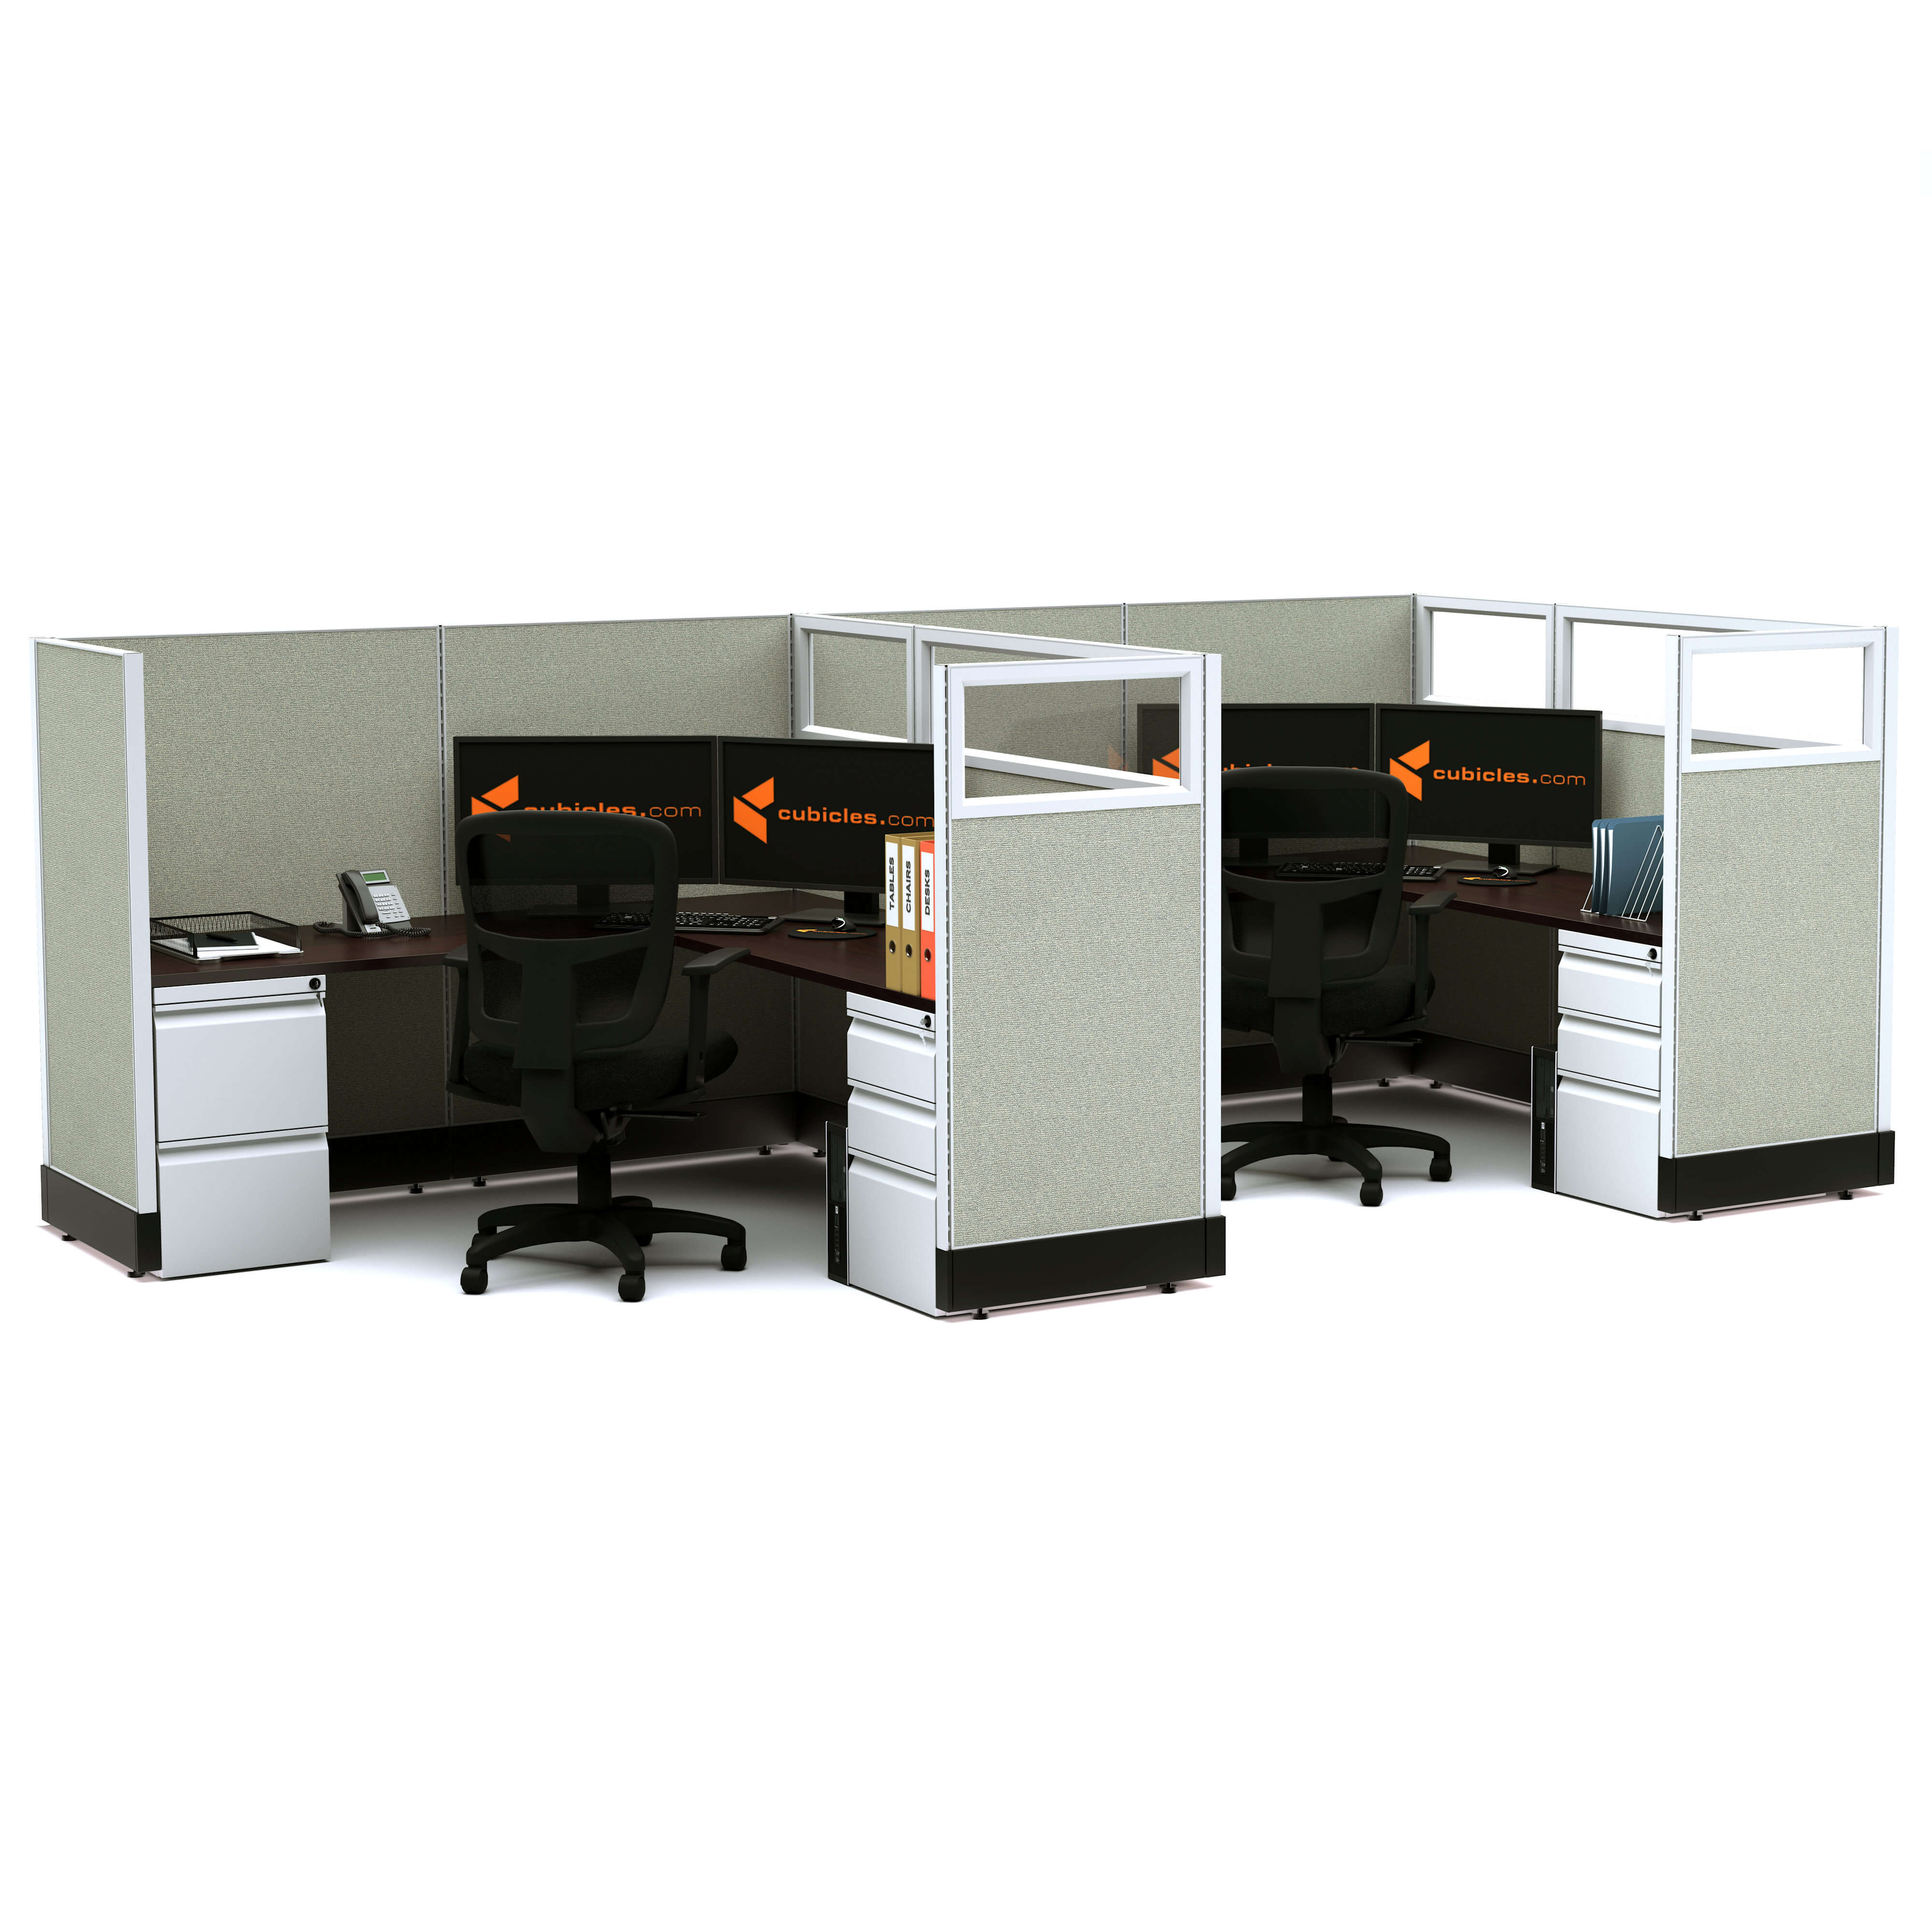 Modular office furniture partial glass office cubicles 53h 2pack inline non powered